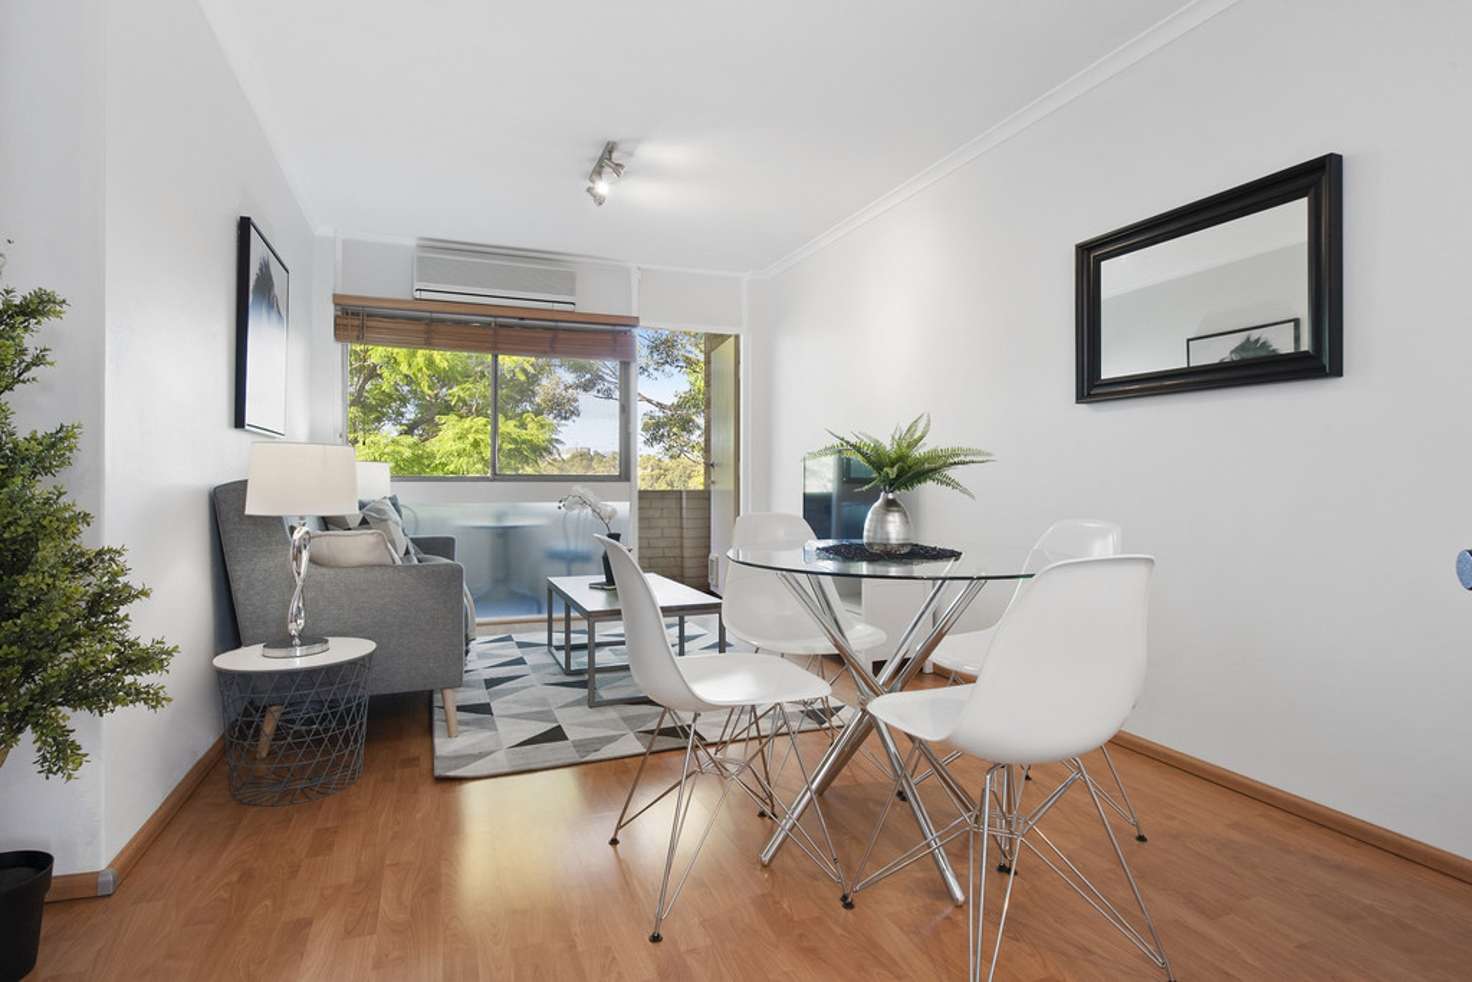 Main view of Homely apartment listing, 22/4 Sherbrooke Rd, West Ryde NSW 2114